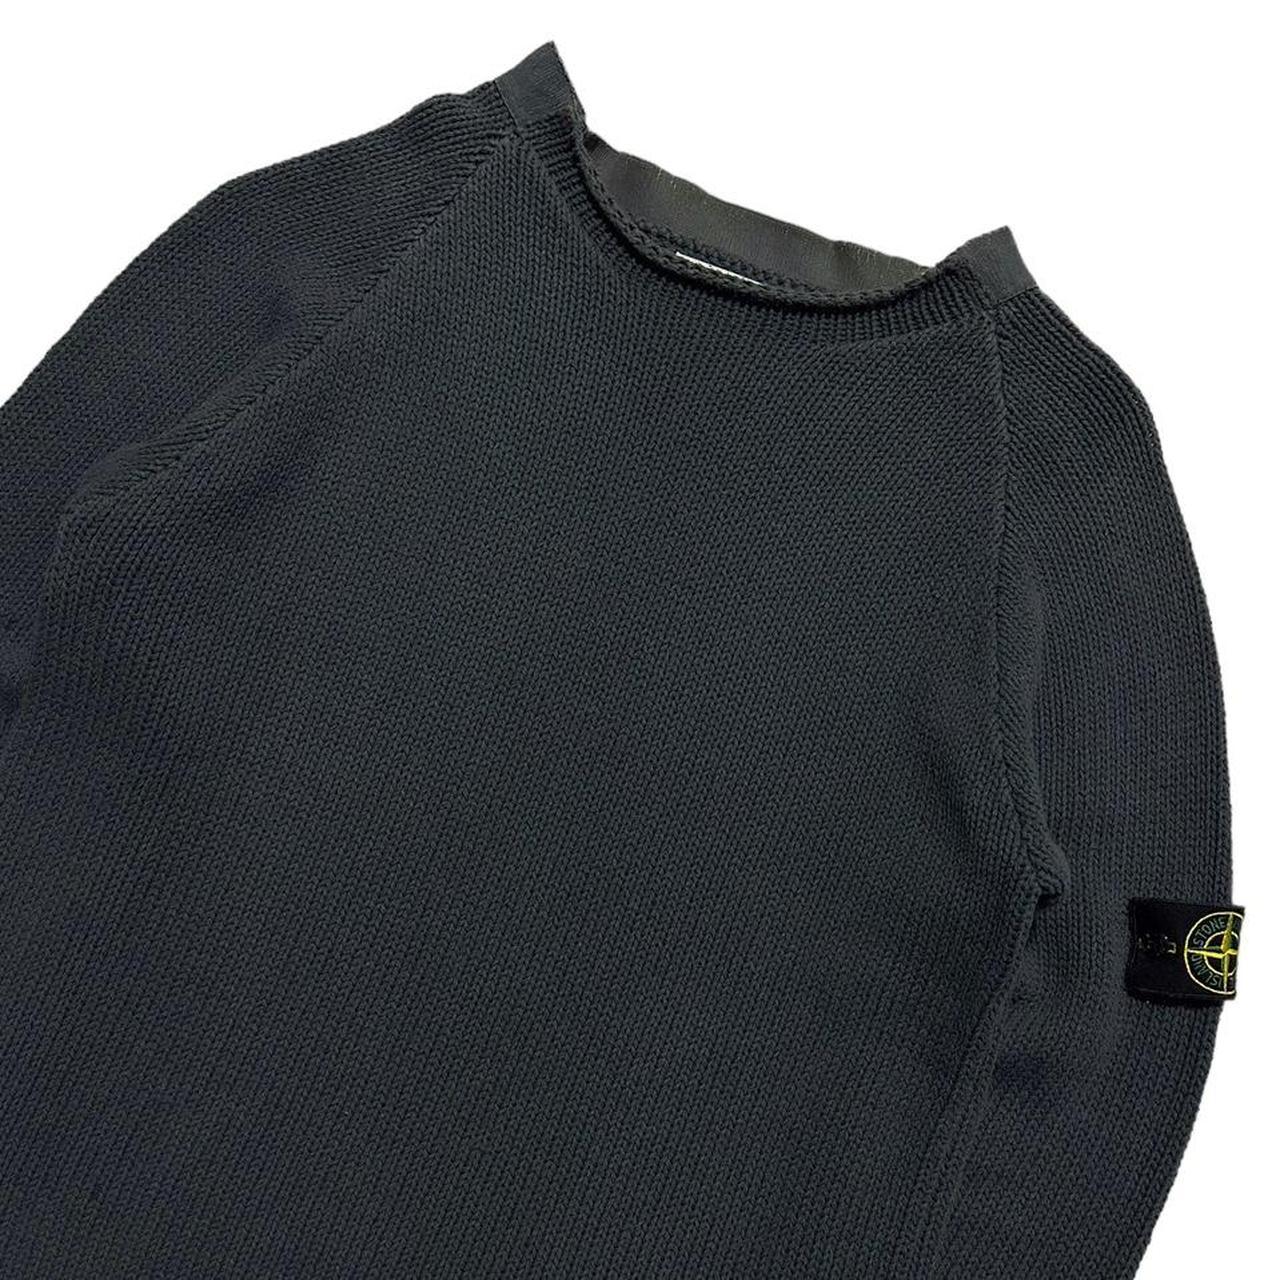 Stone Island 2000's Pullover Jumper - Known Source